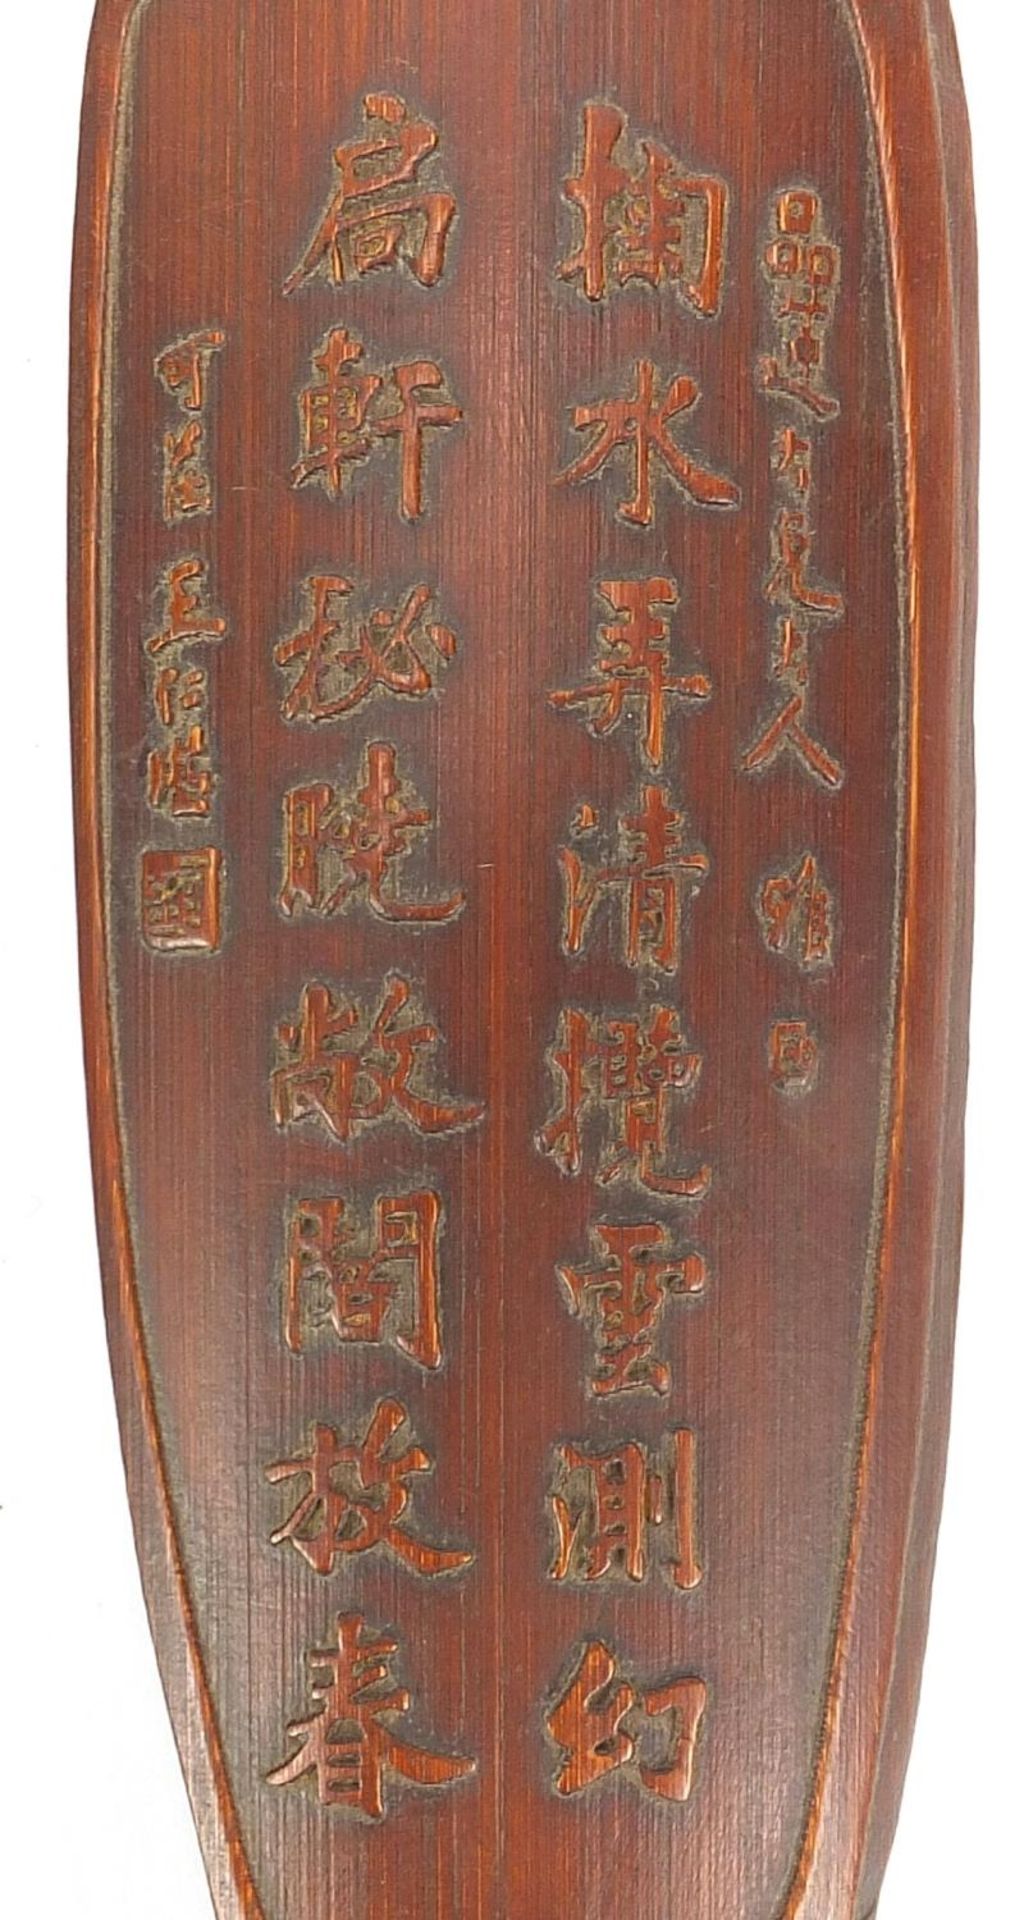 Two Chinese carved bamboo scholar's wrist rests including one in the form of a vase with - Image 2 of 4